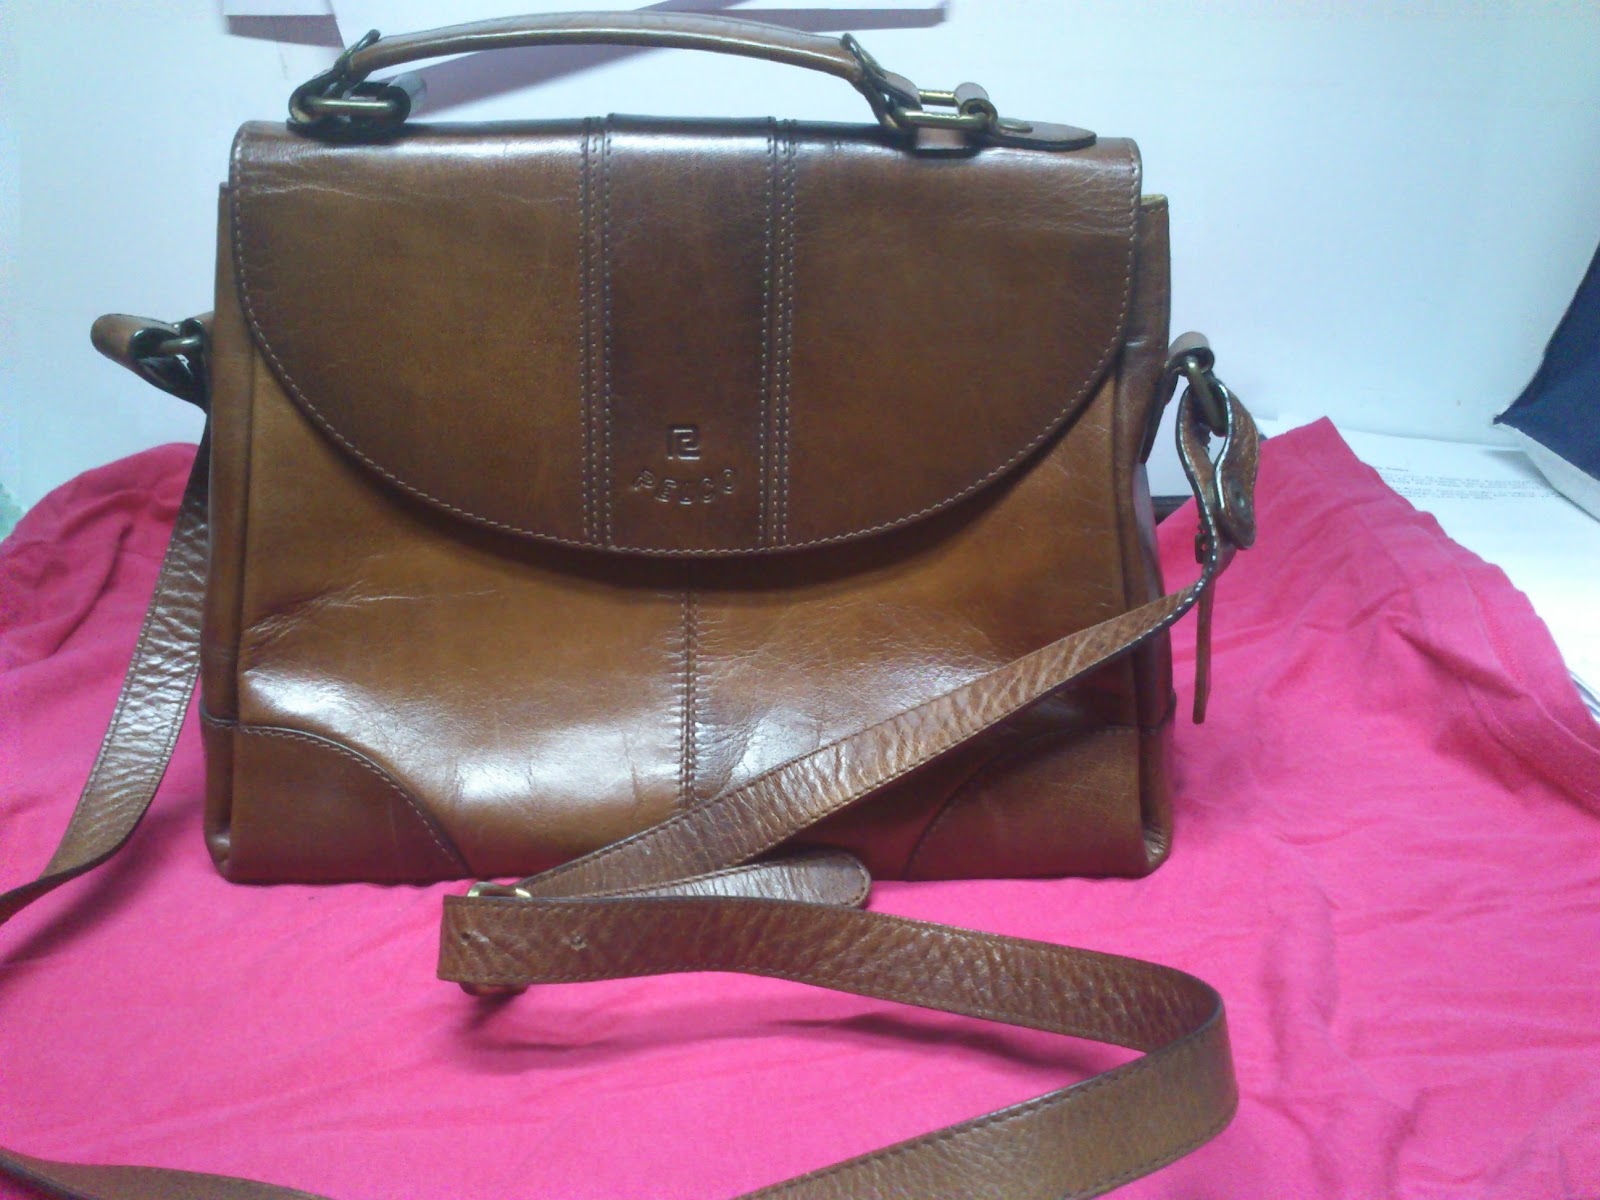 BaranK Lame: Pelco Leather Sling Bag - SOLD